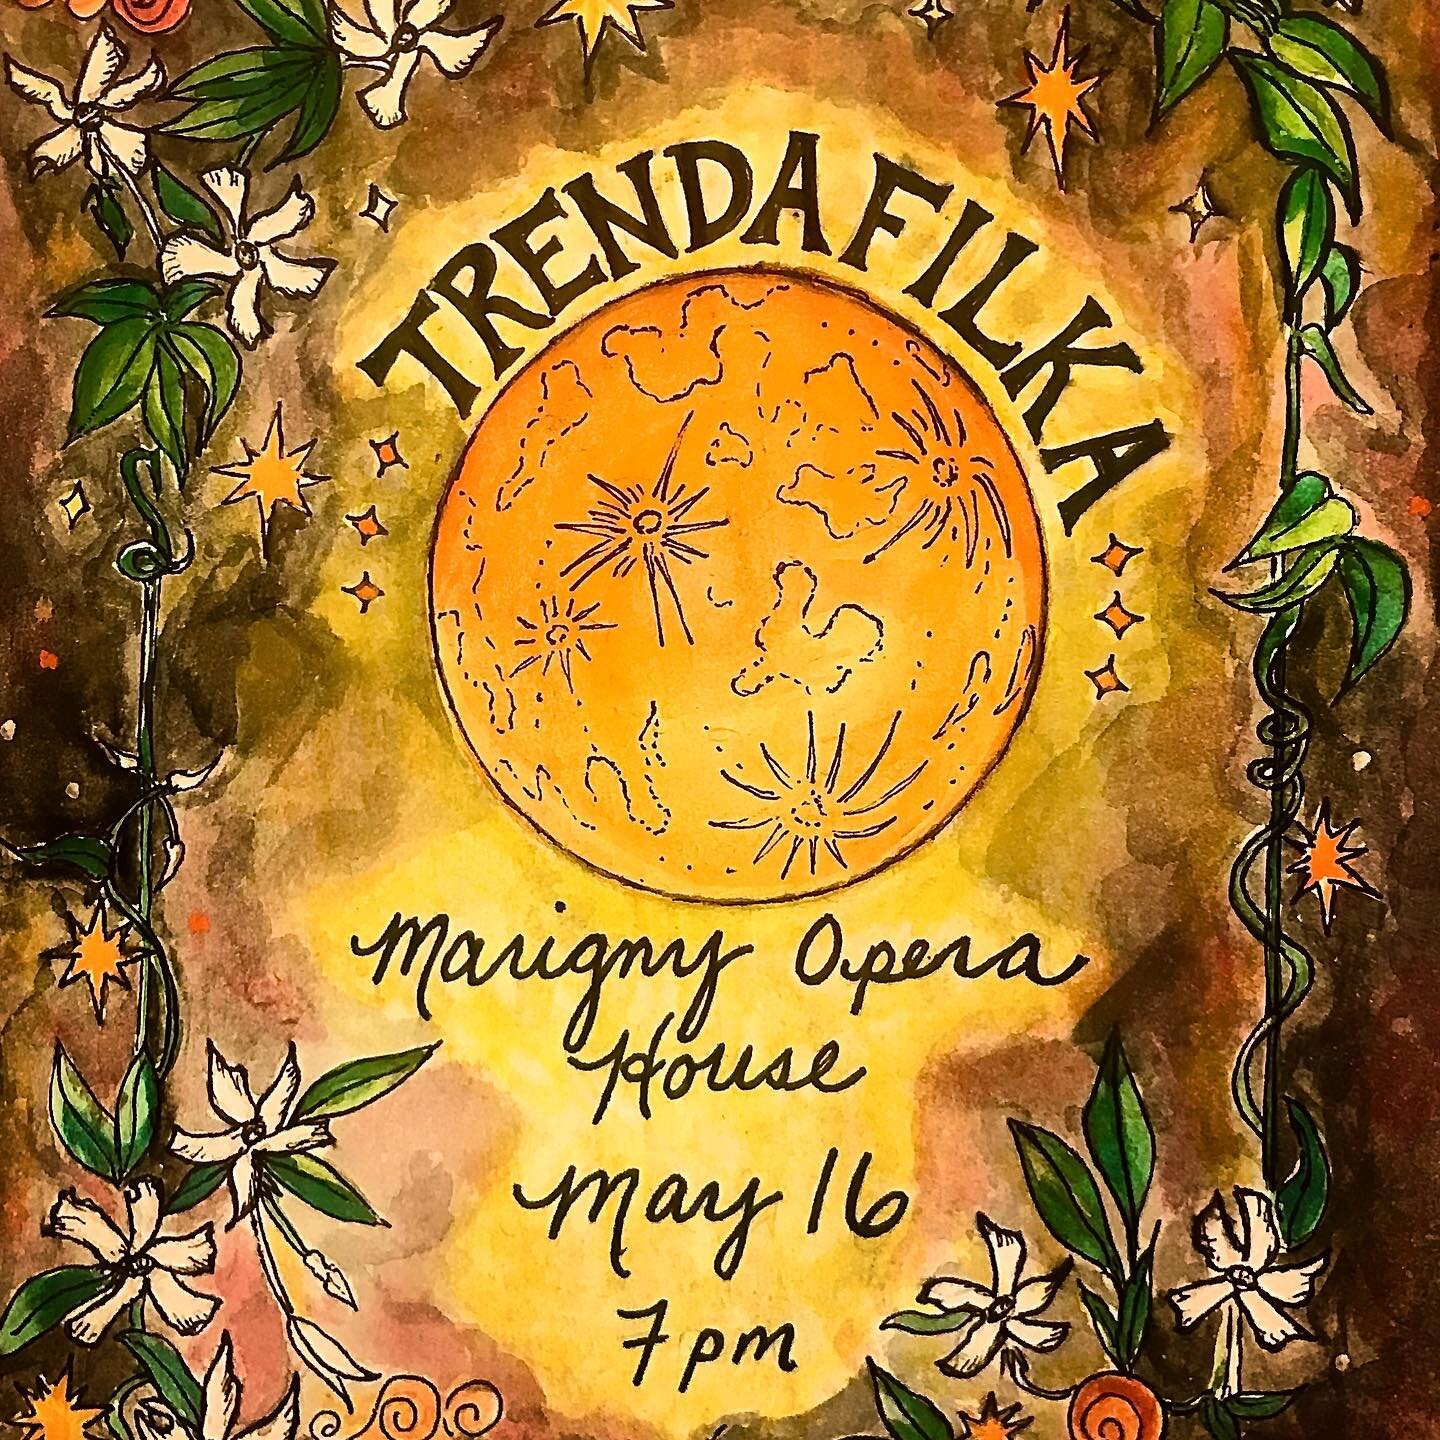 We&rsquo;re over the moon to announce that after a 2.5 year hiatus, we will be performing for the public on May 16th at the beloved Marigny Opera House. Our first show since 2019, y&rsquo;all!  We&rsquo;ll be singing some of our classics as well as p